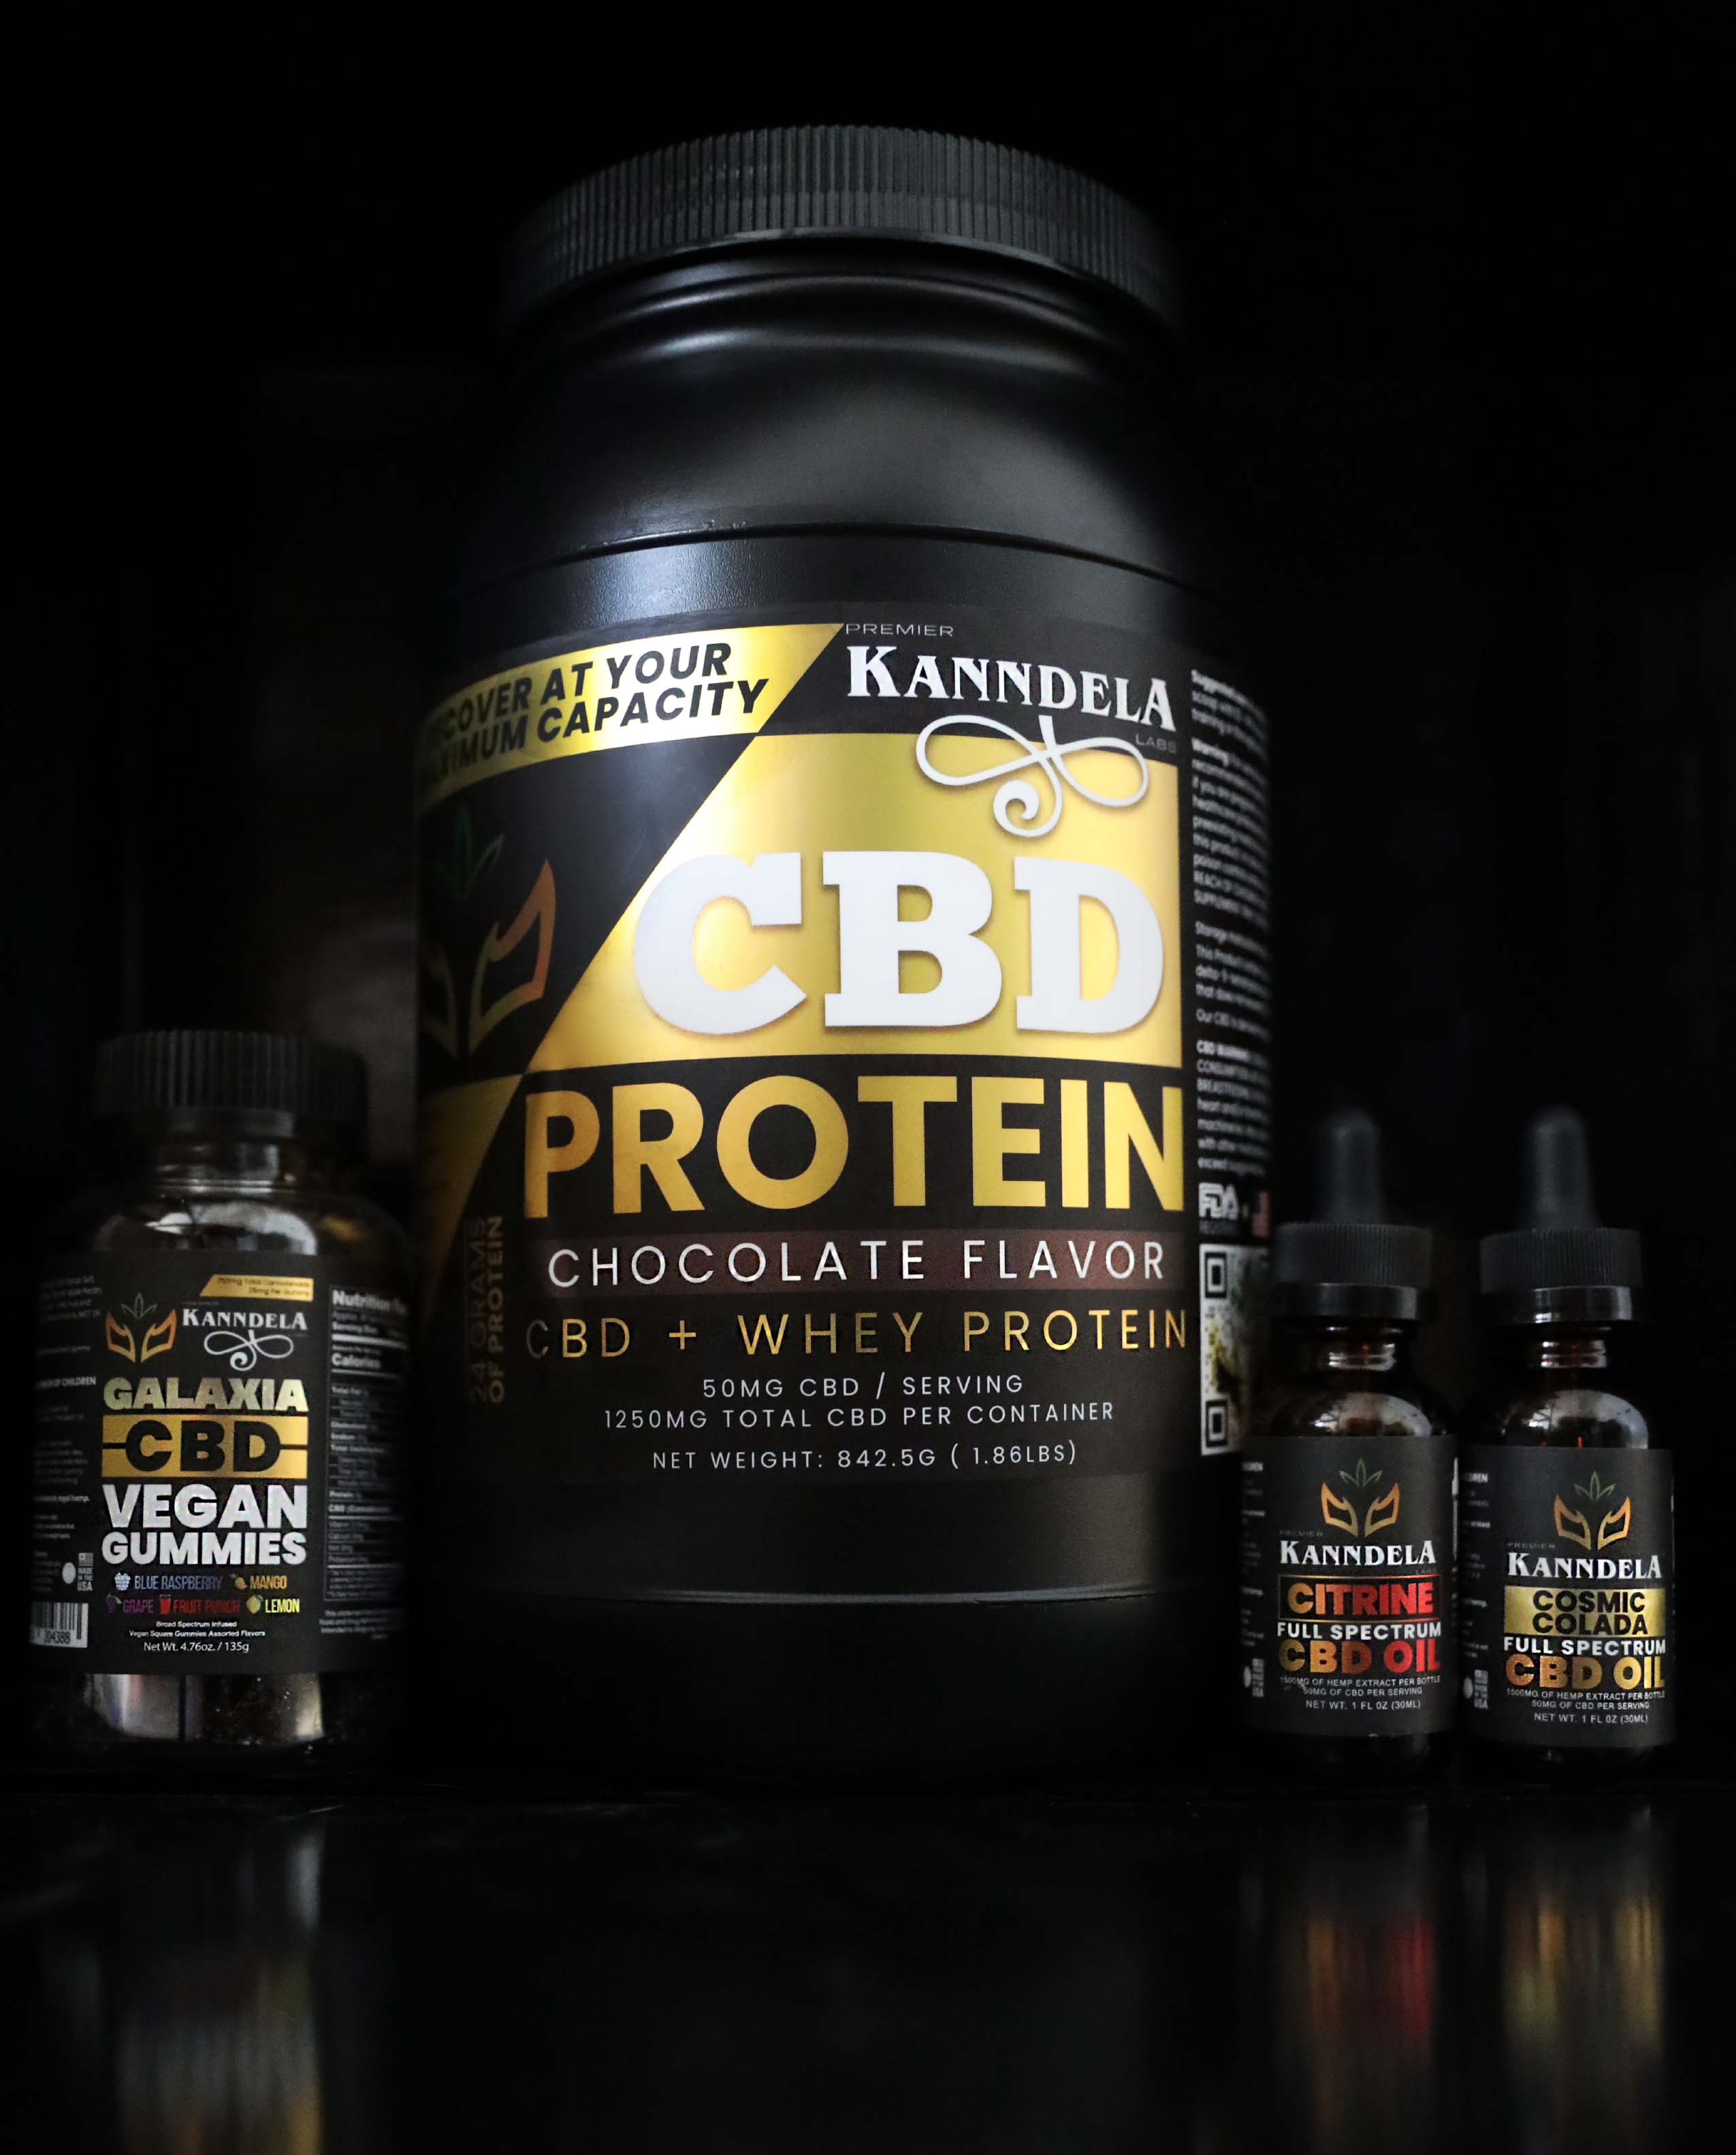 Former WWE star, Kalisto, launches Kanndela, a CBD brand with unique, industry-leading products